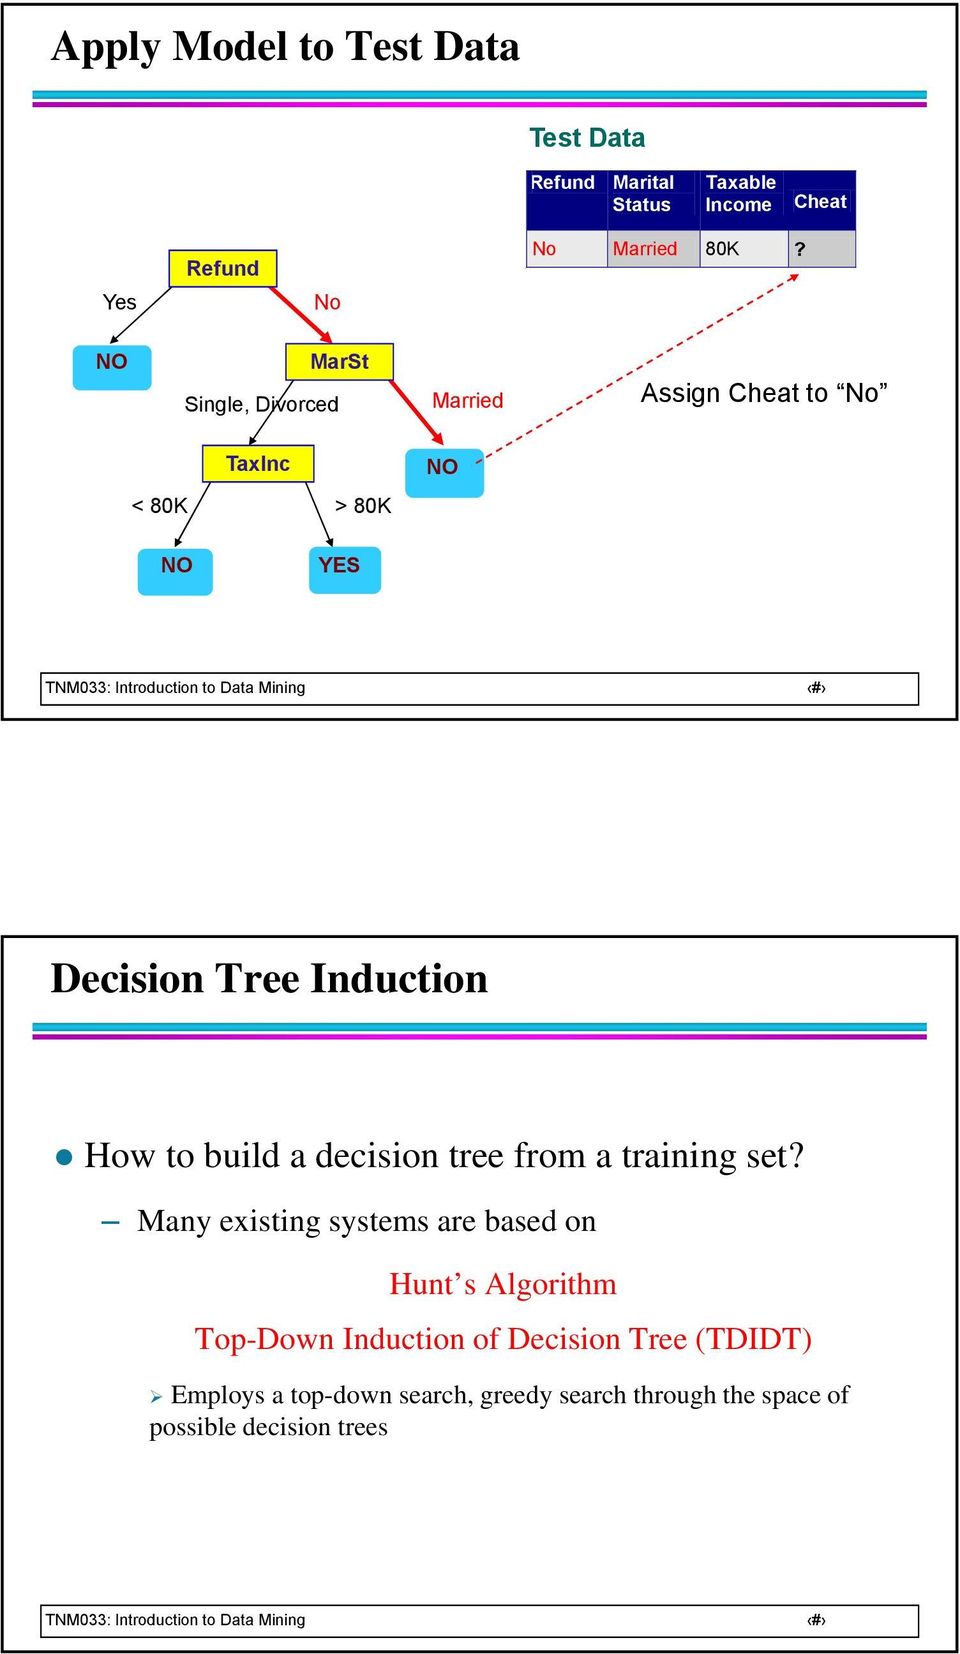 build a decision tree from a training set?